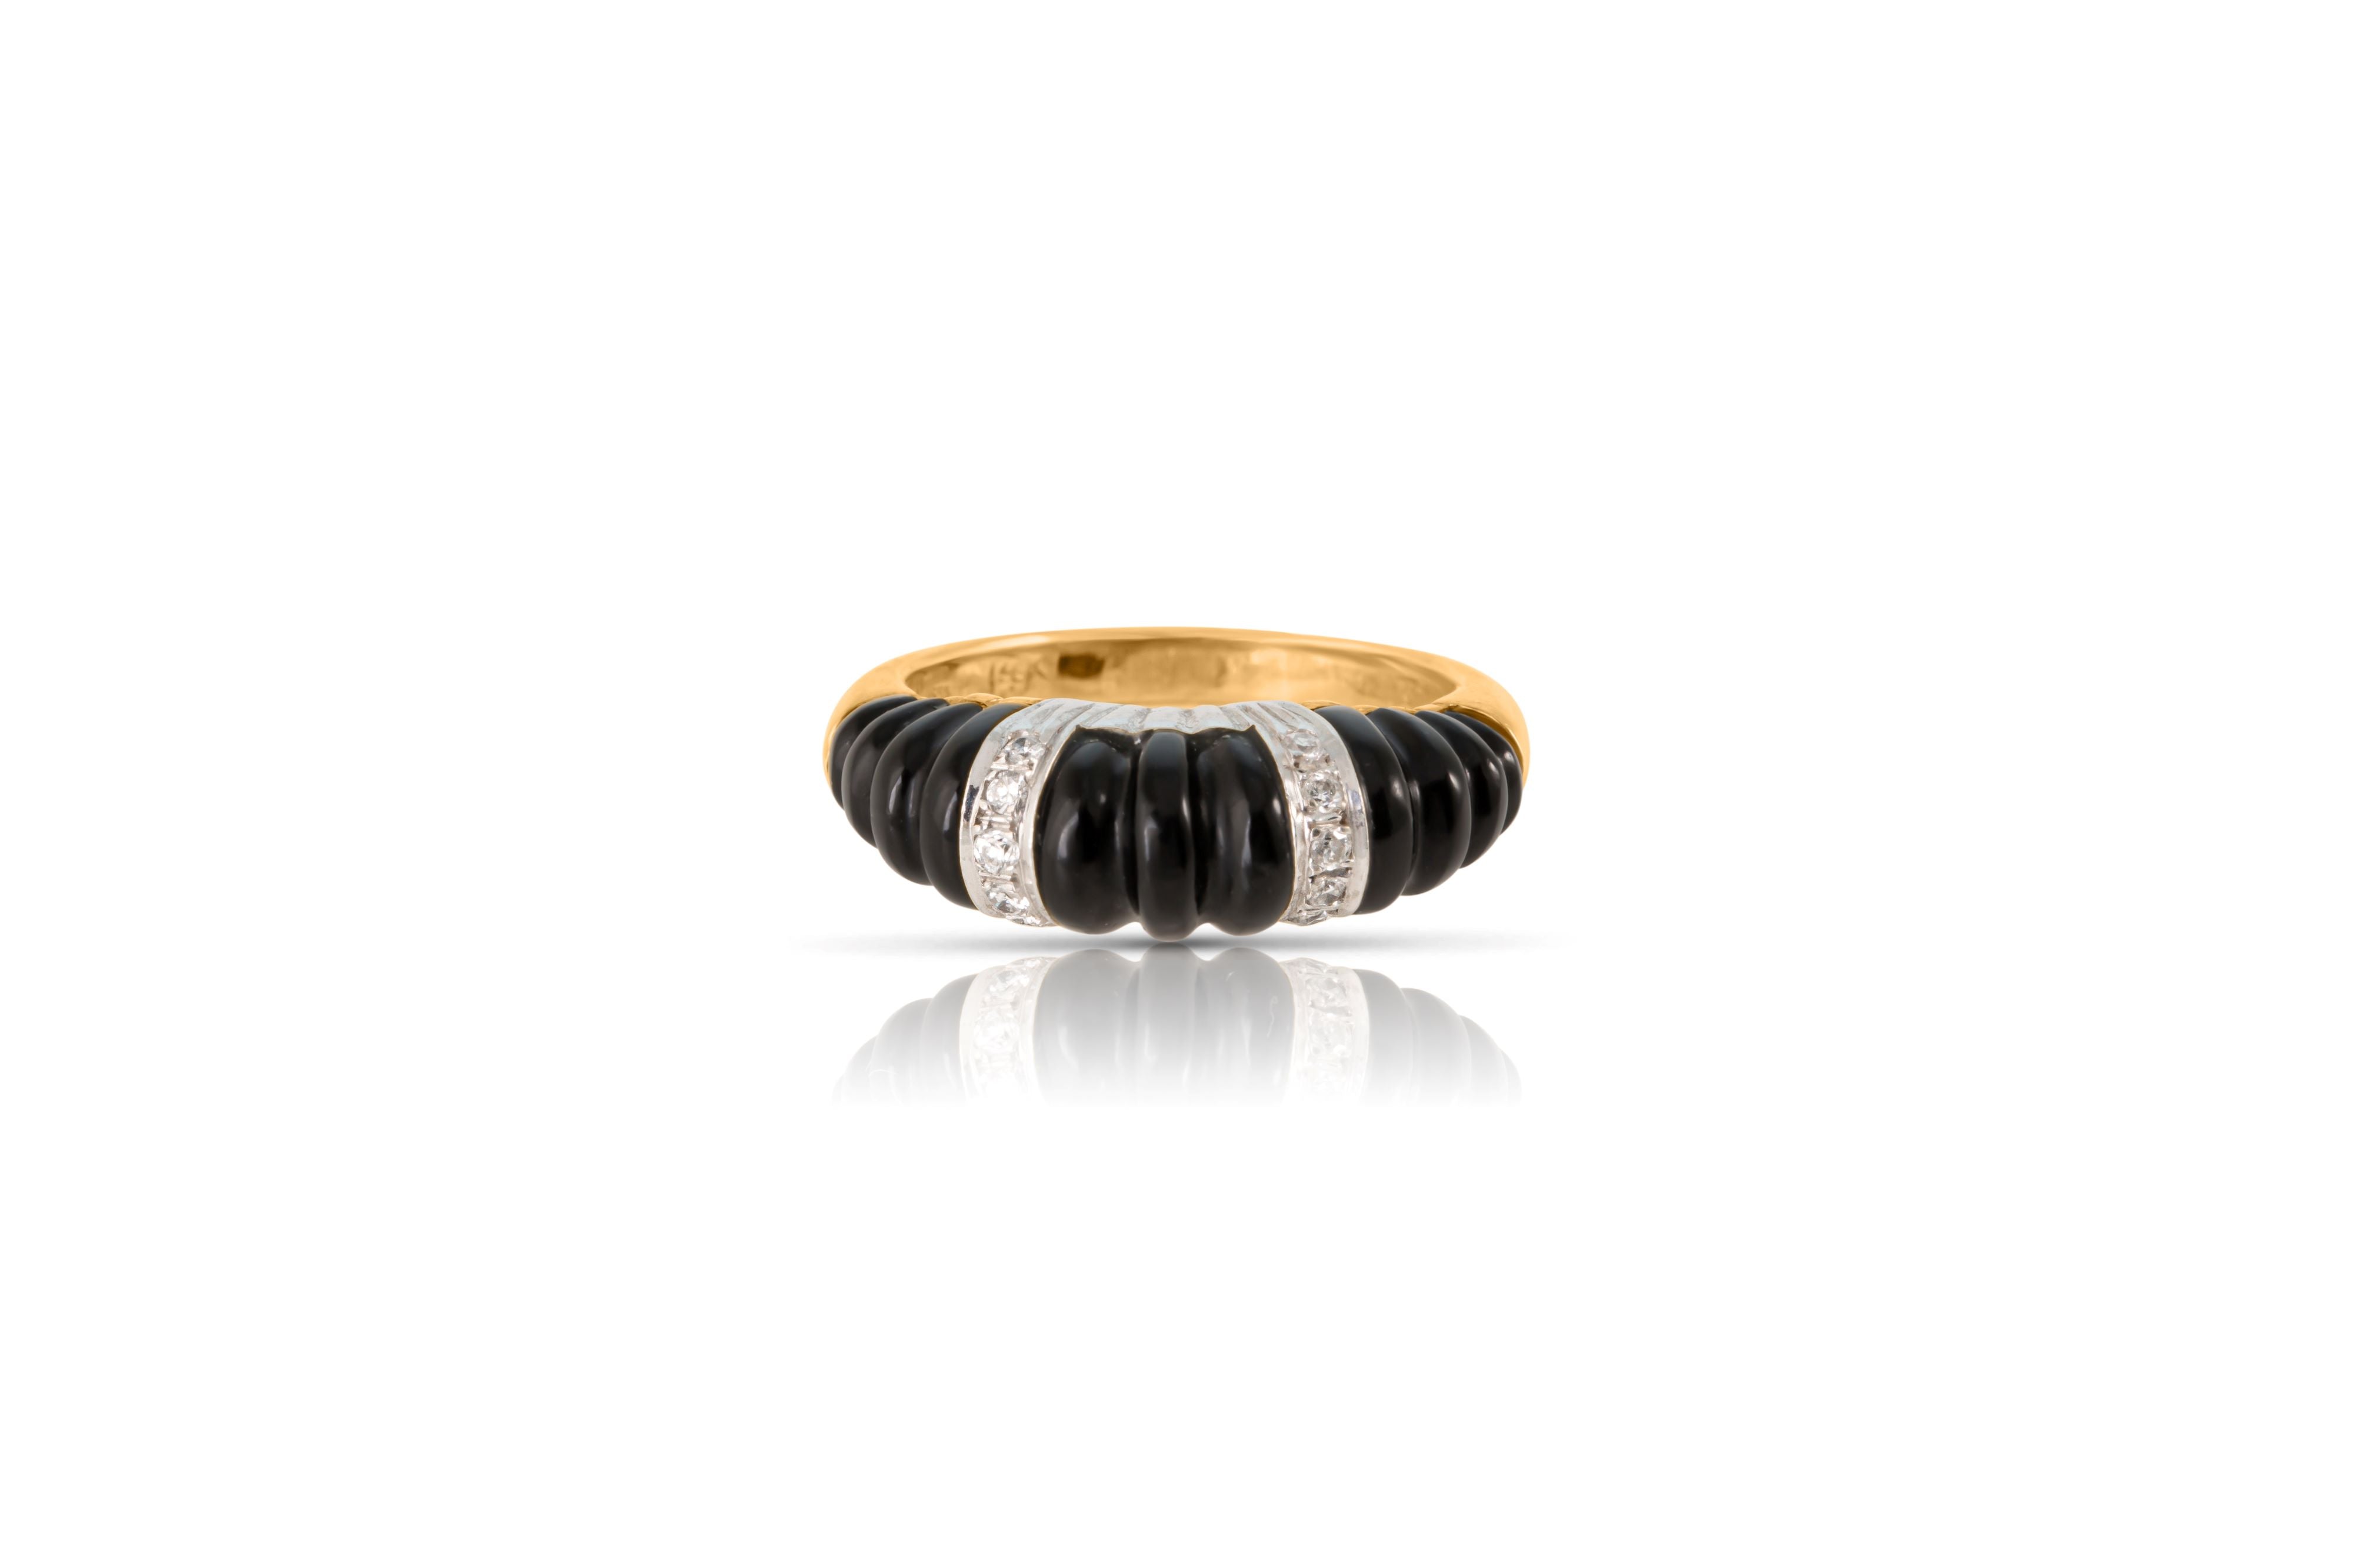 Top view of gold and carved black onyx dome ring with diamonds.